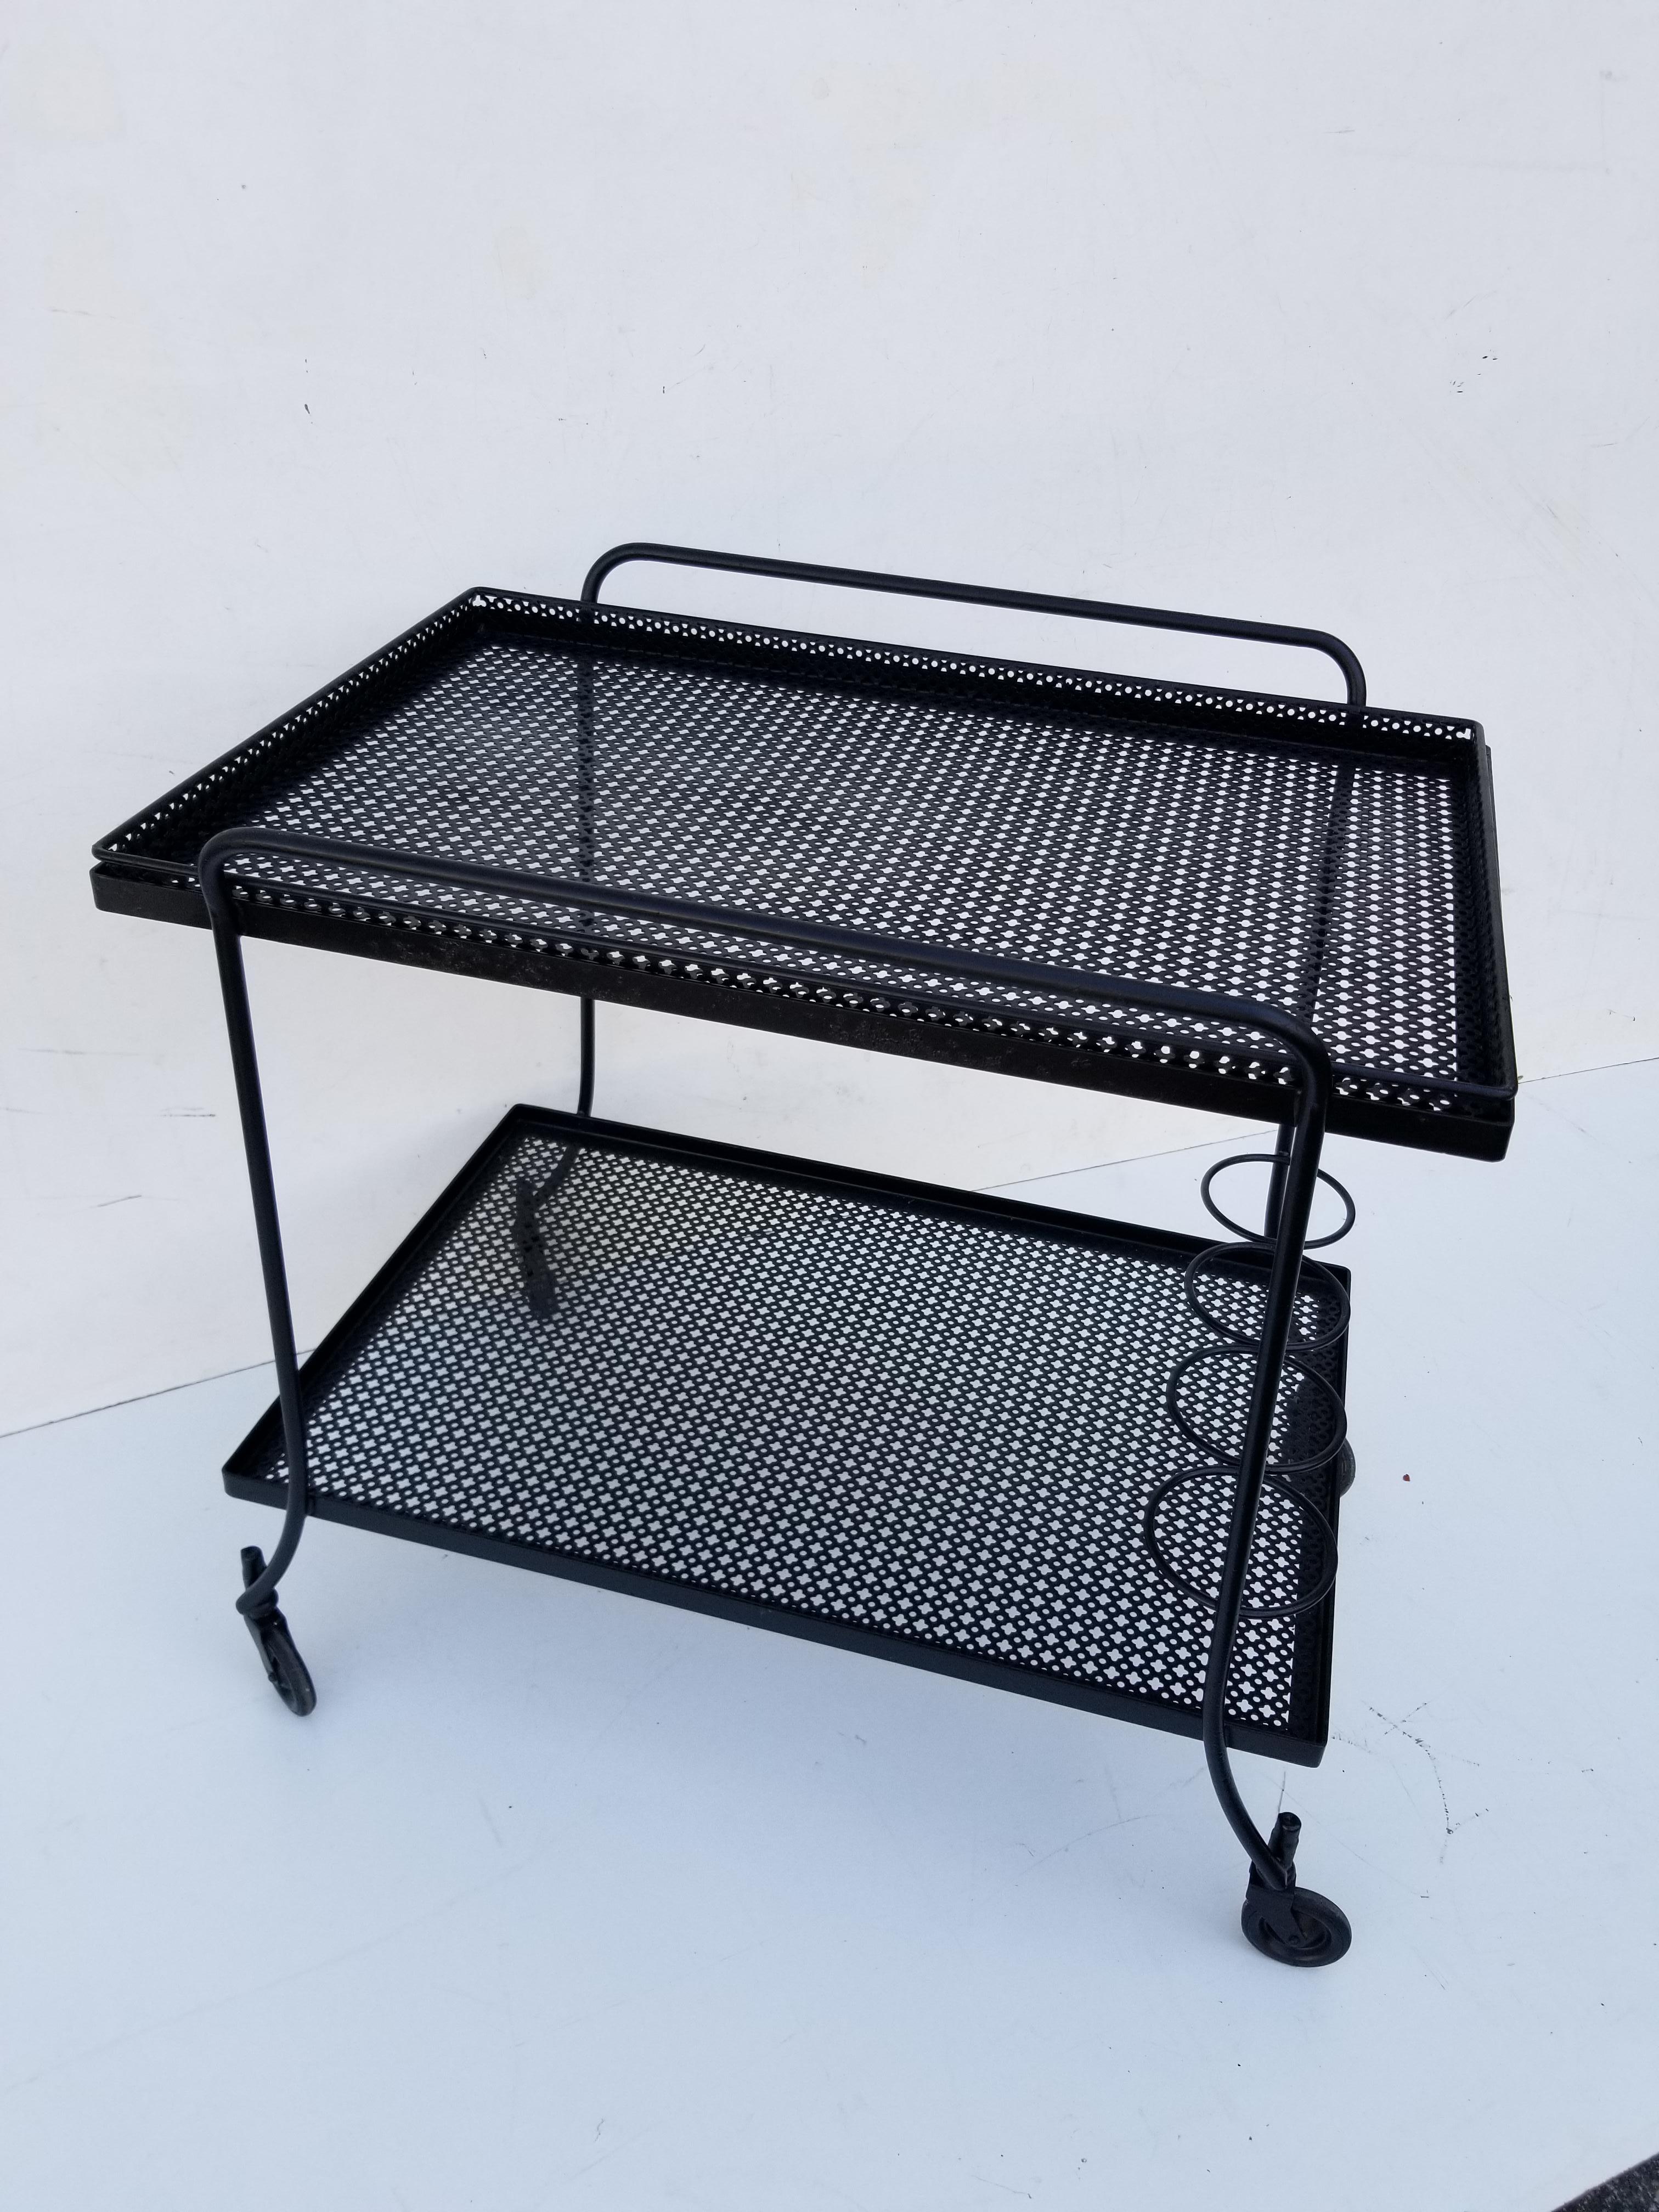 Mathieu Matégot metal bar cart, 2-tier .
Good condition, wheels in good working order, can be use.
Removable top tray, dimension on the tray: 28 /18 inches
1-tier high 9 inches
Restored condition.